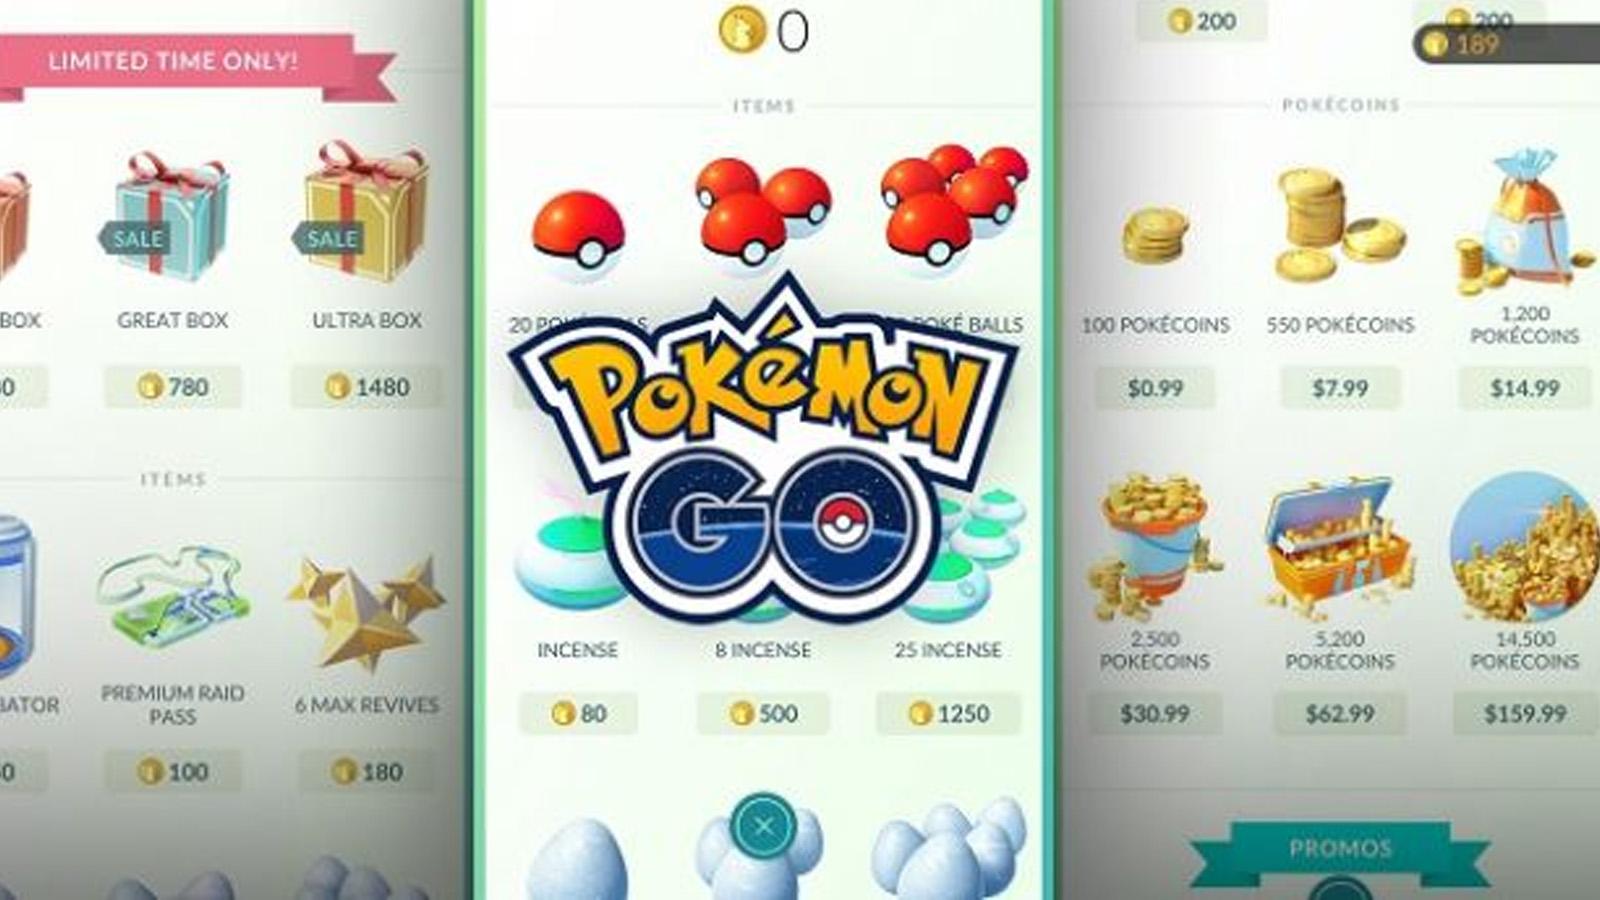 Best Items to Buy with Real Money - Pokemon GO Guide - IGN